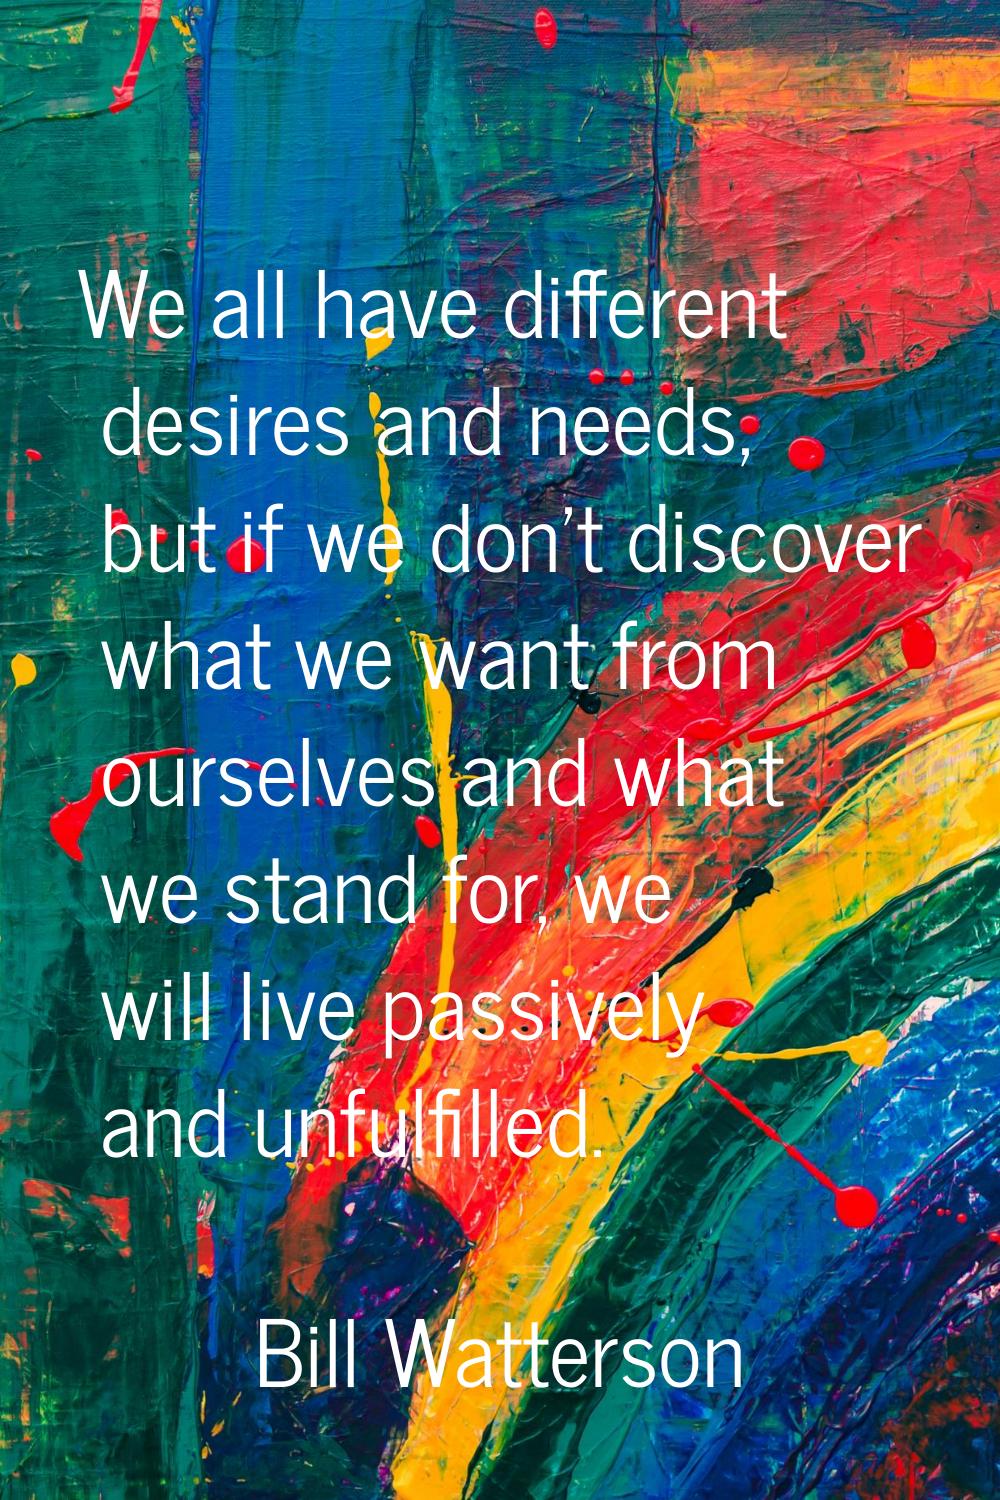 We all have different desires and needs, but if we don't discover what we want from ourselves and w